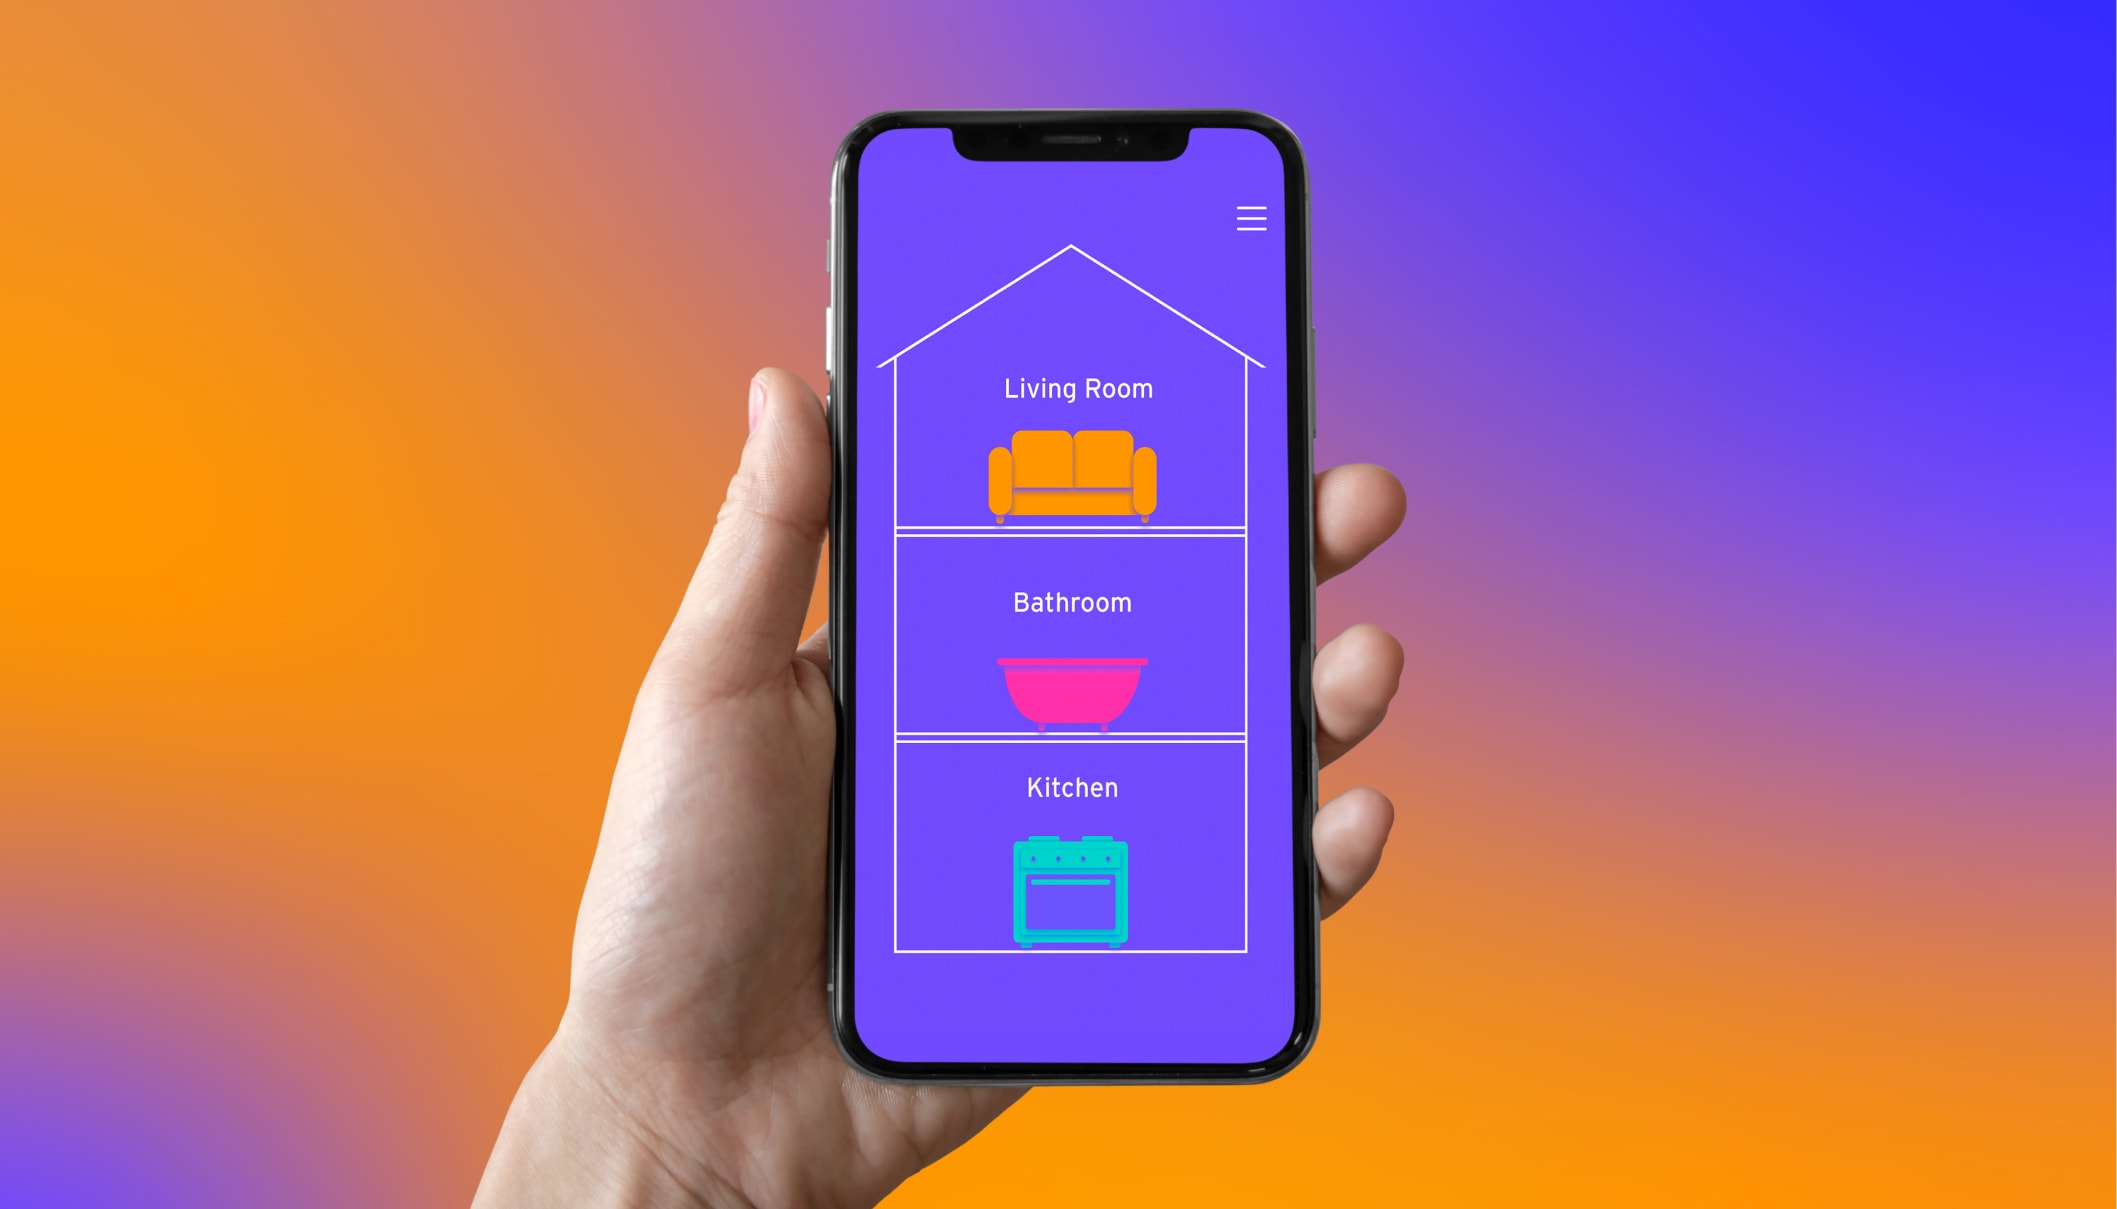 A person holds an iphone screen showing an abstract house with three levels in front of a orange and blue gradient